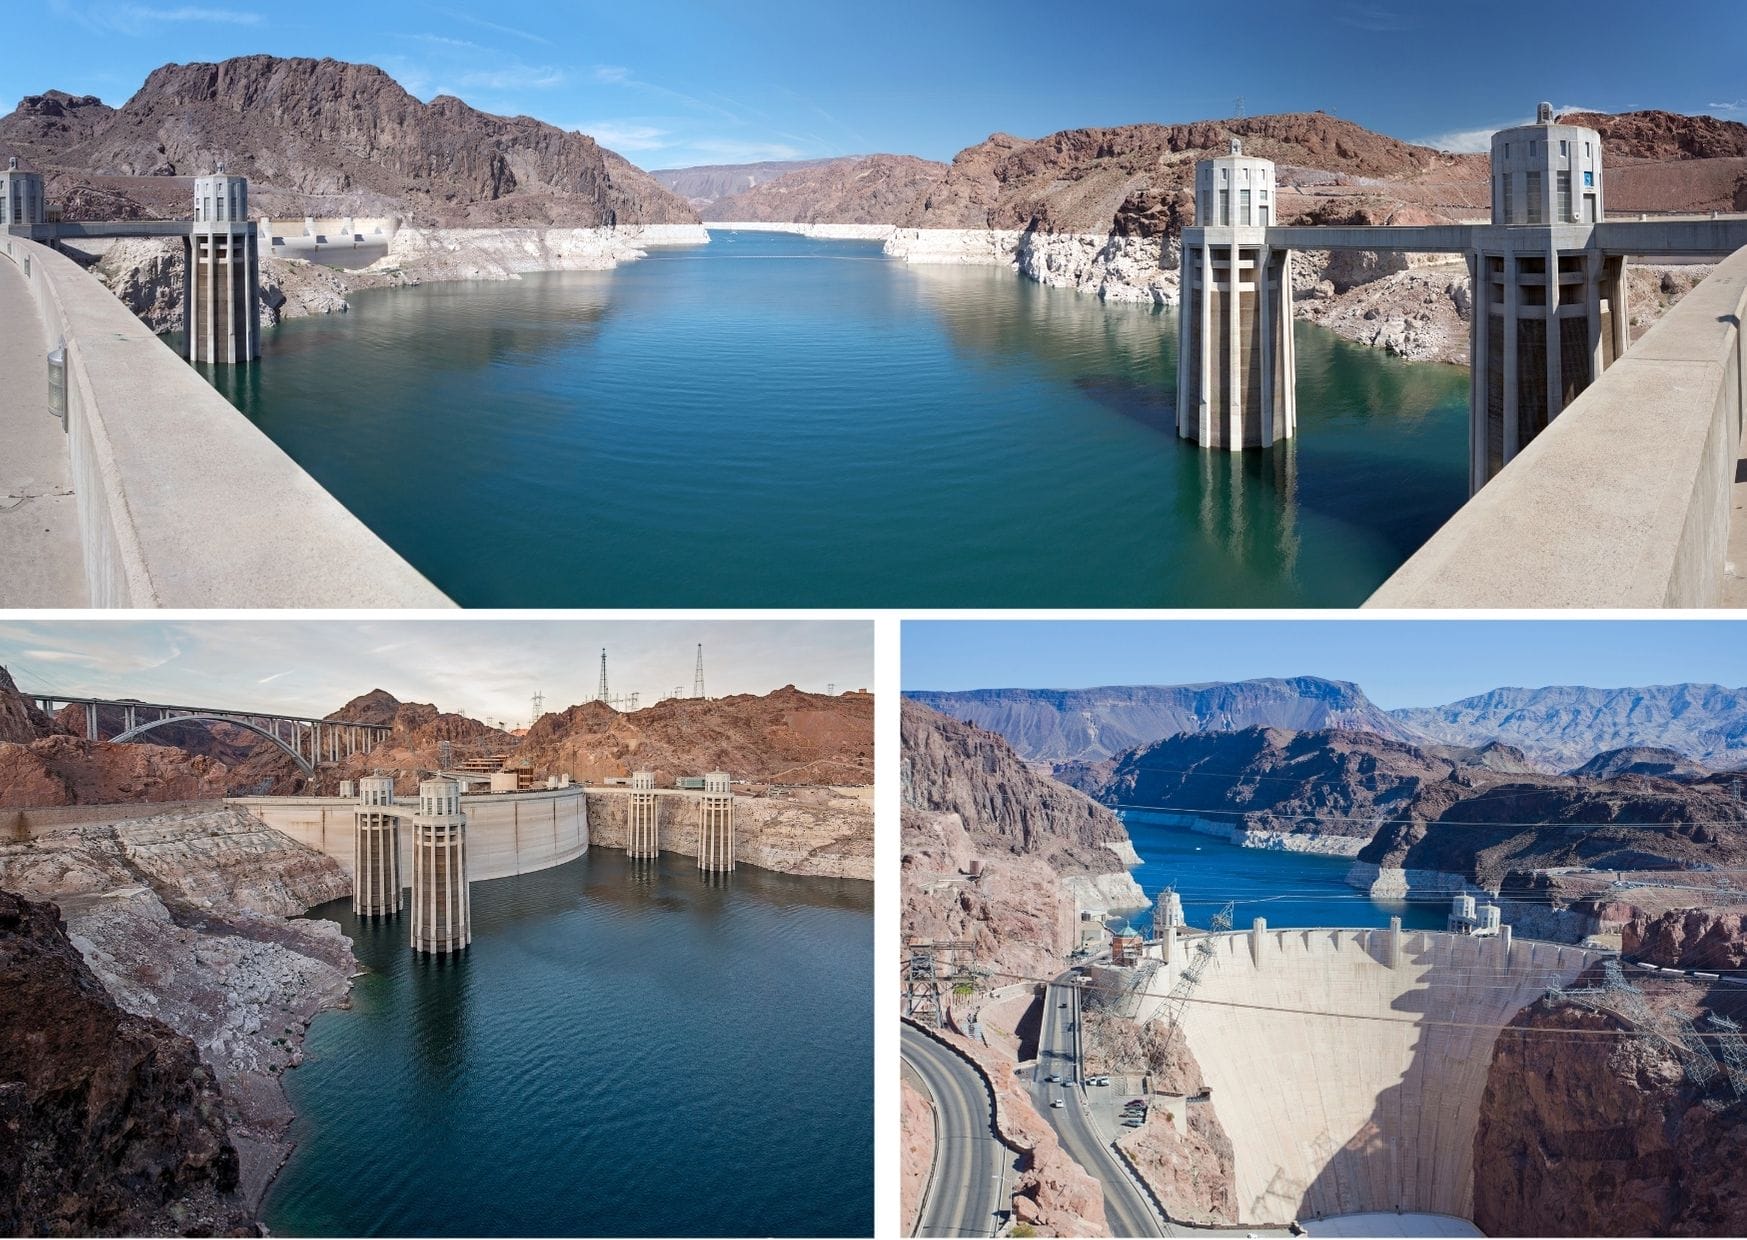 The Hoover Dam is a popular stop off on the way to The Grand Canyon